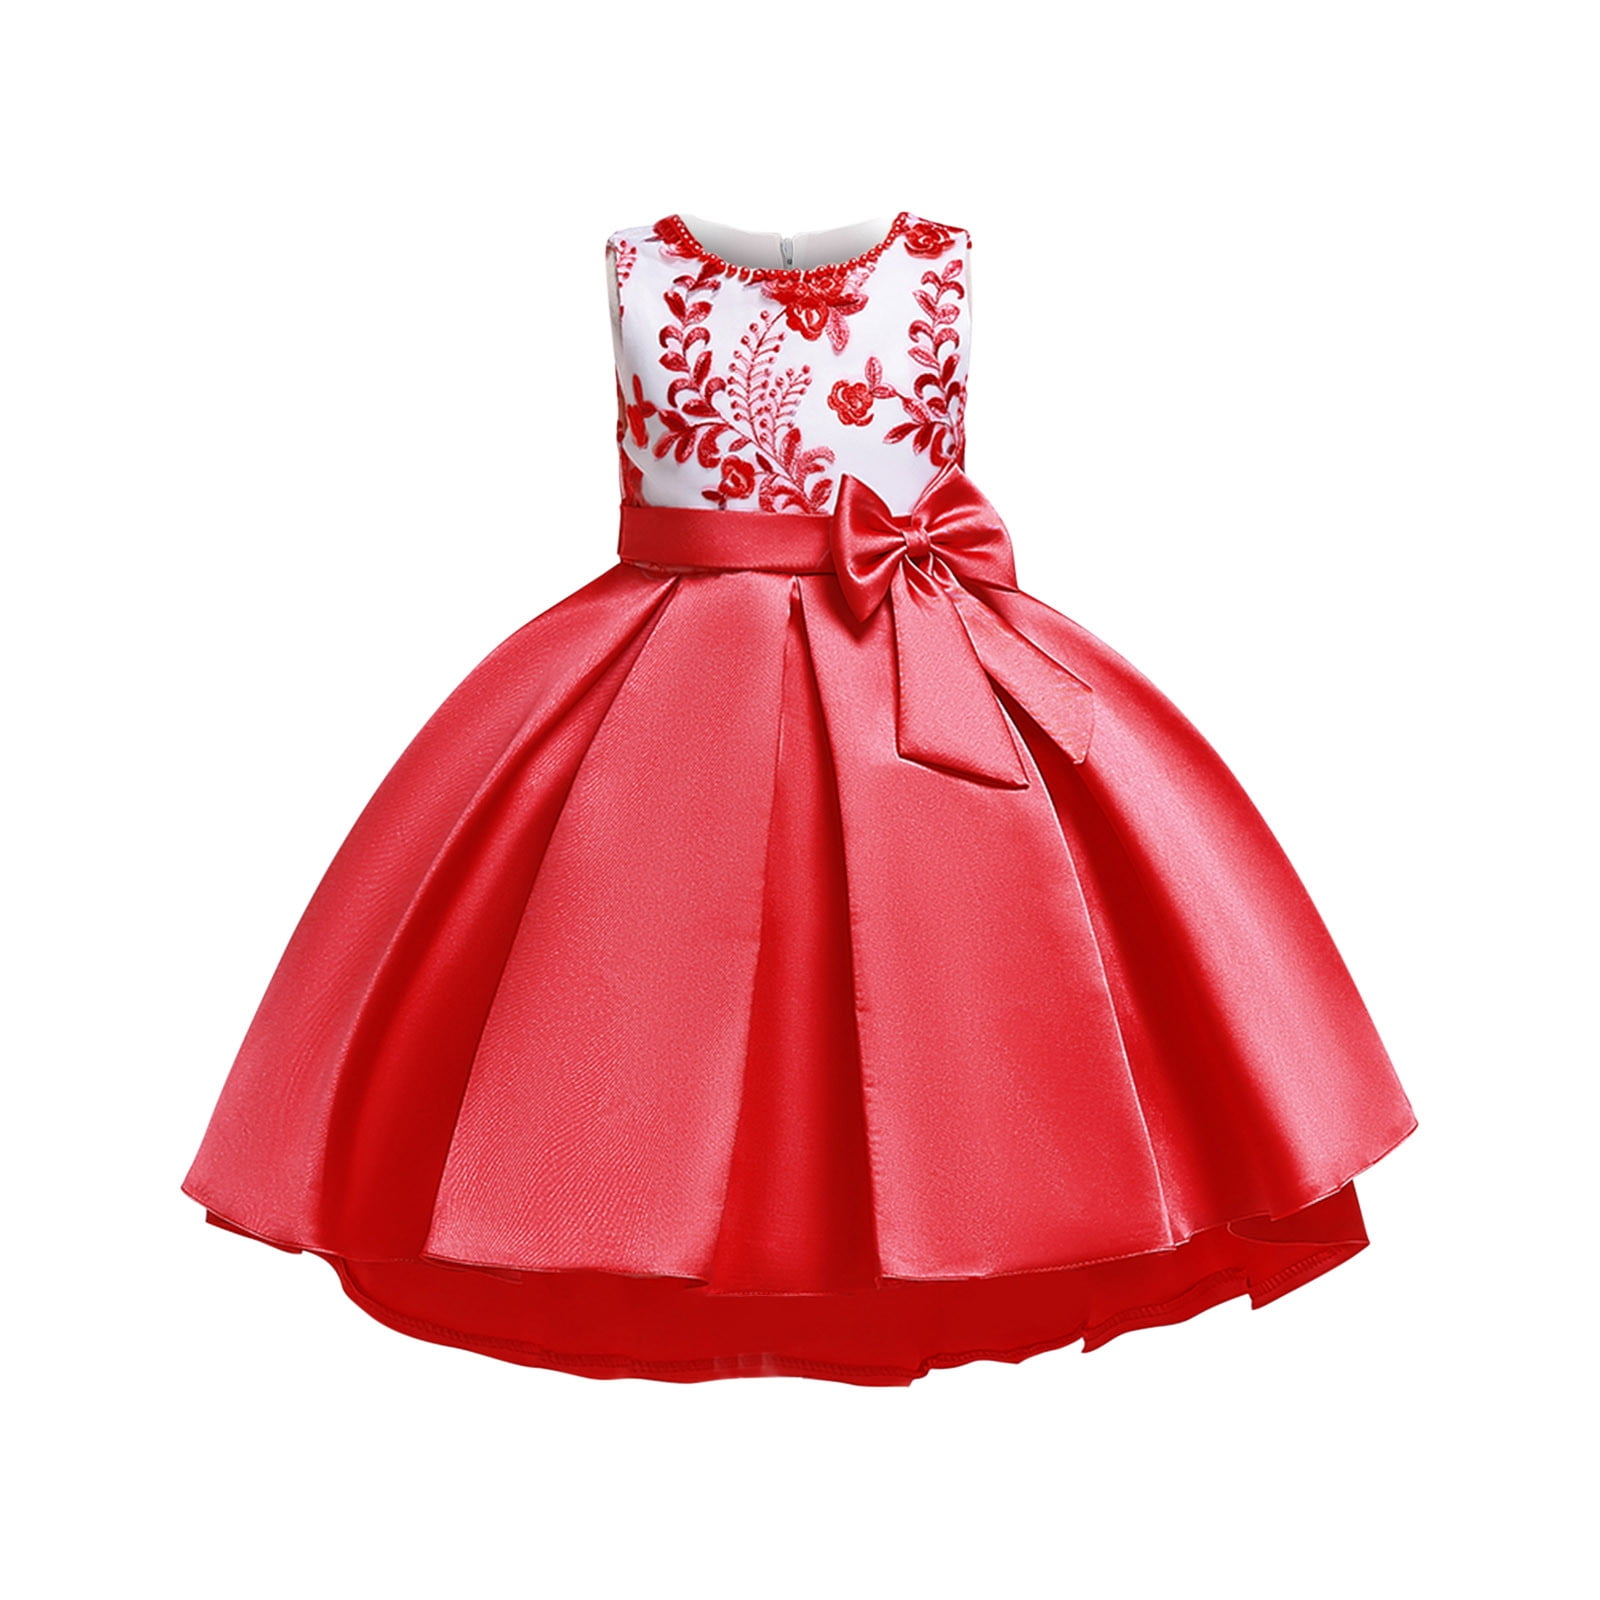 Ready to ship 7/8 years - Peach Lace Flower Girl tutu tulle Dress